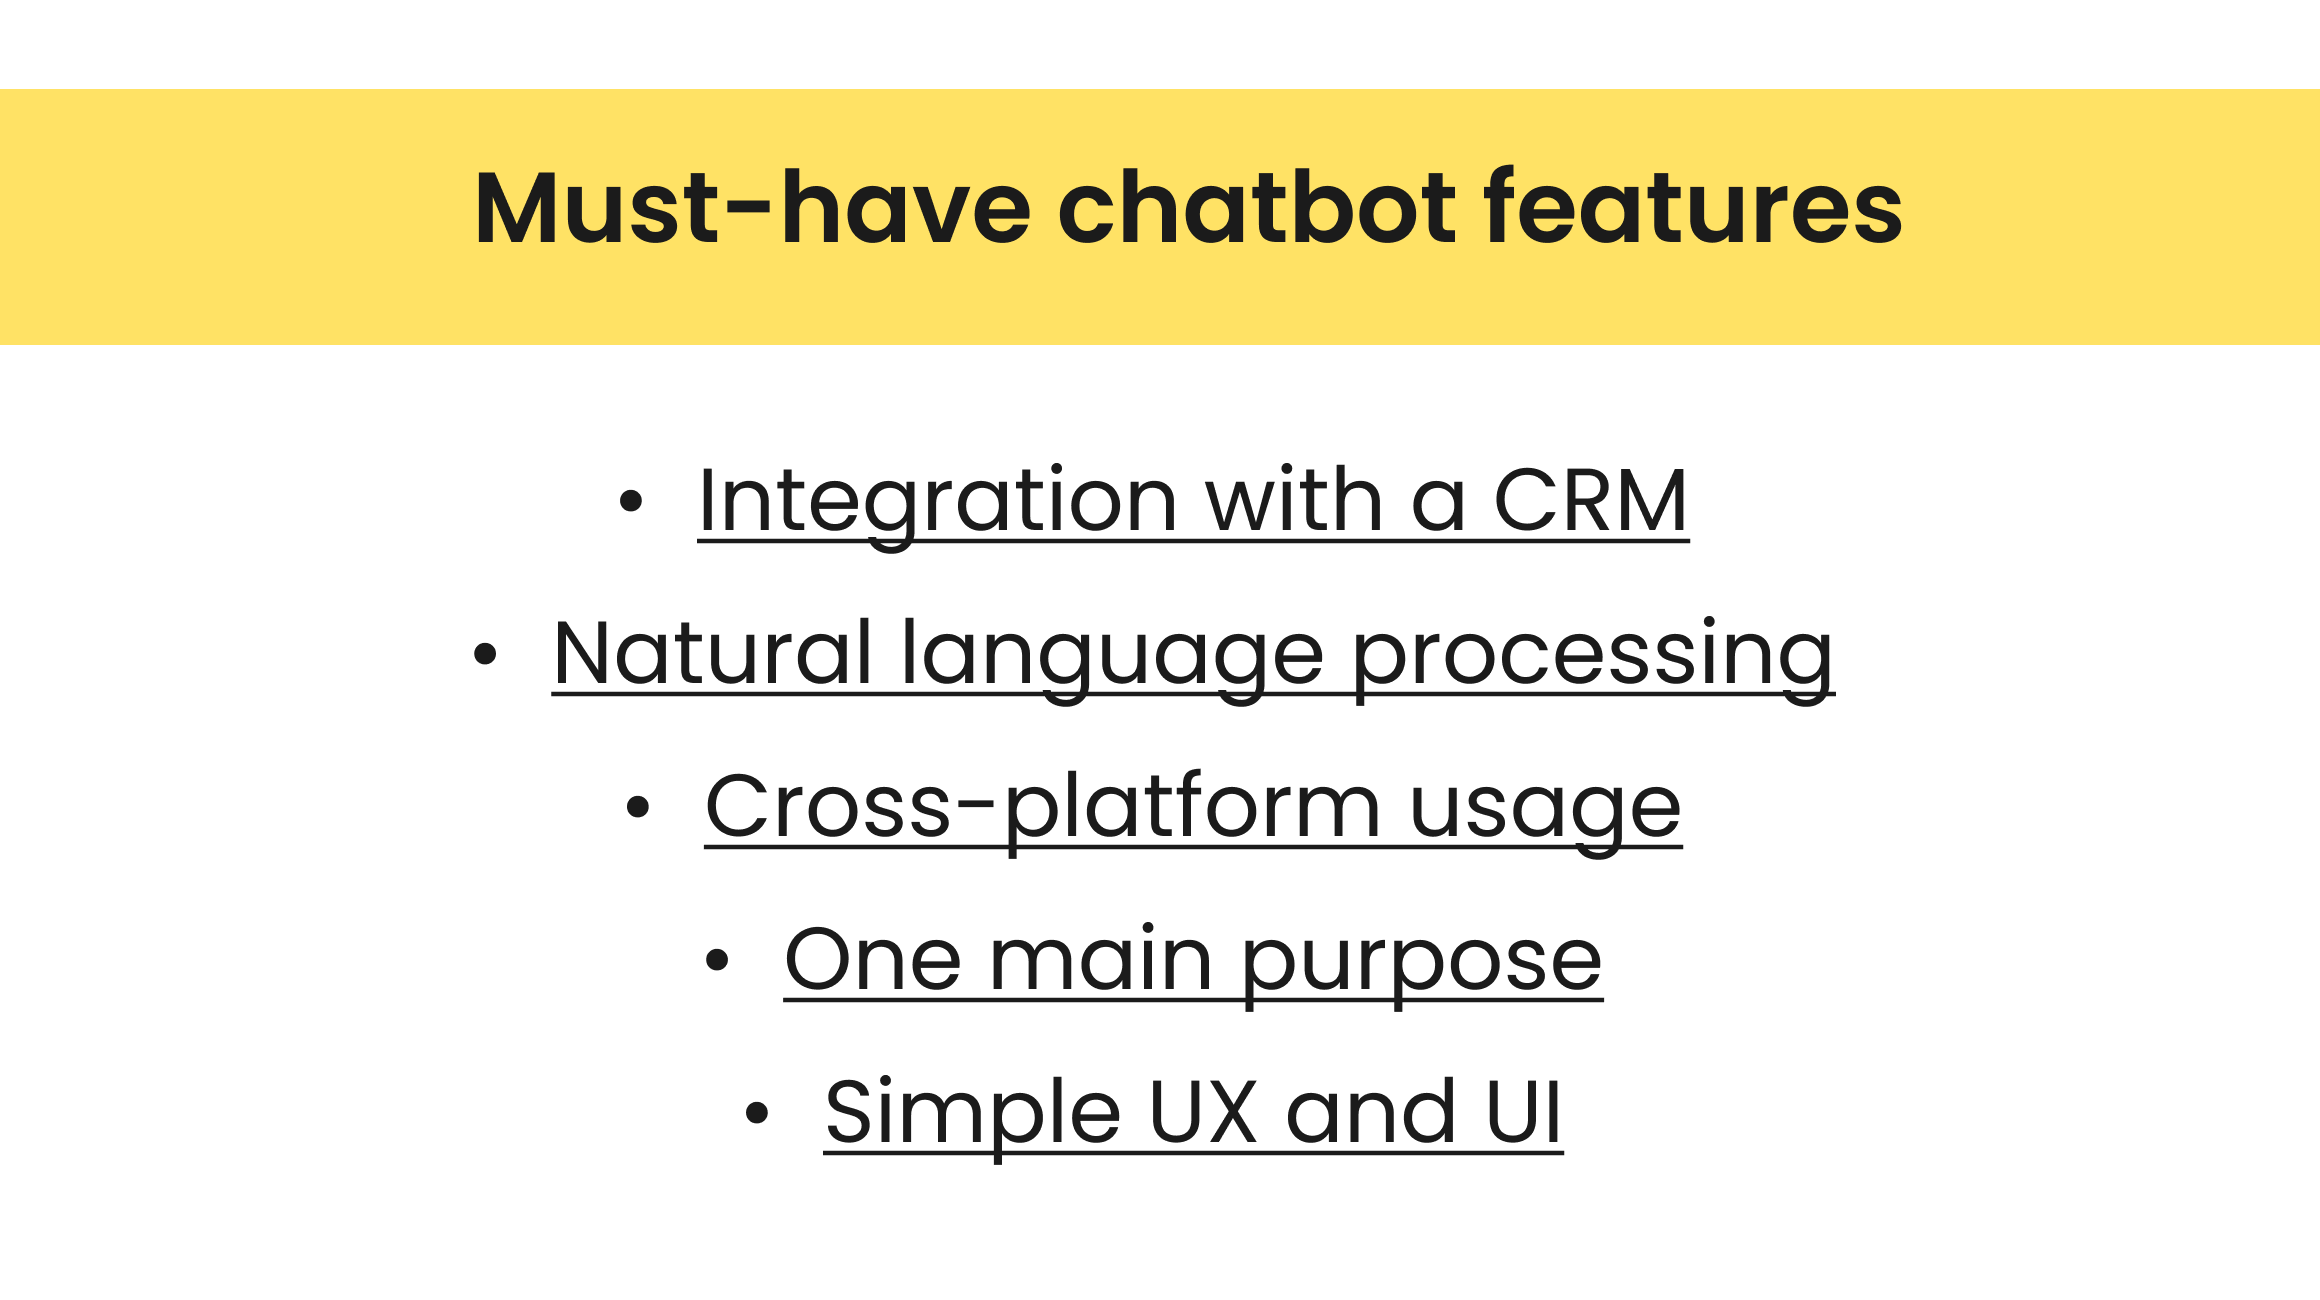 must-have chatbots features